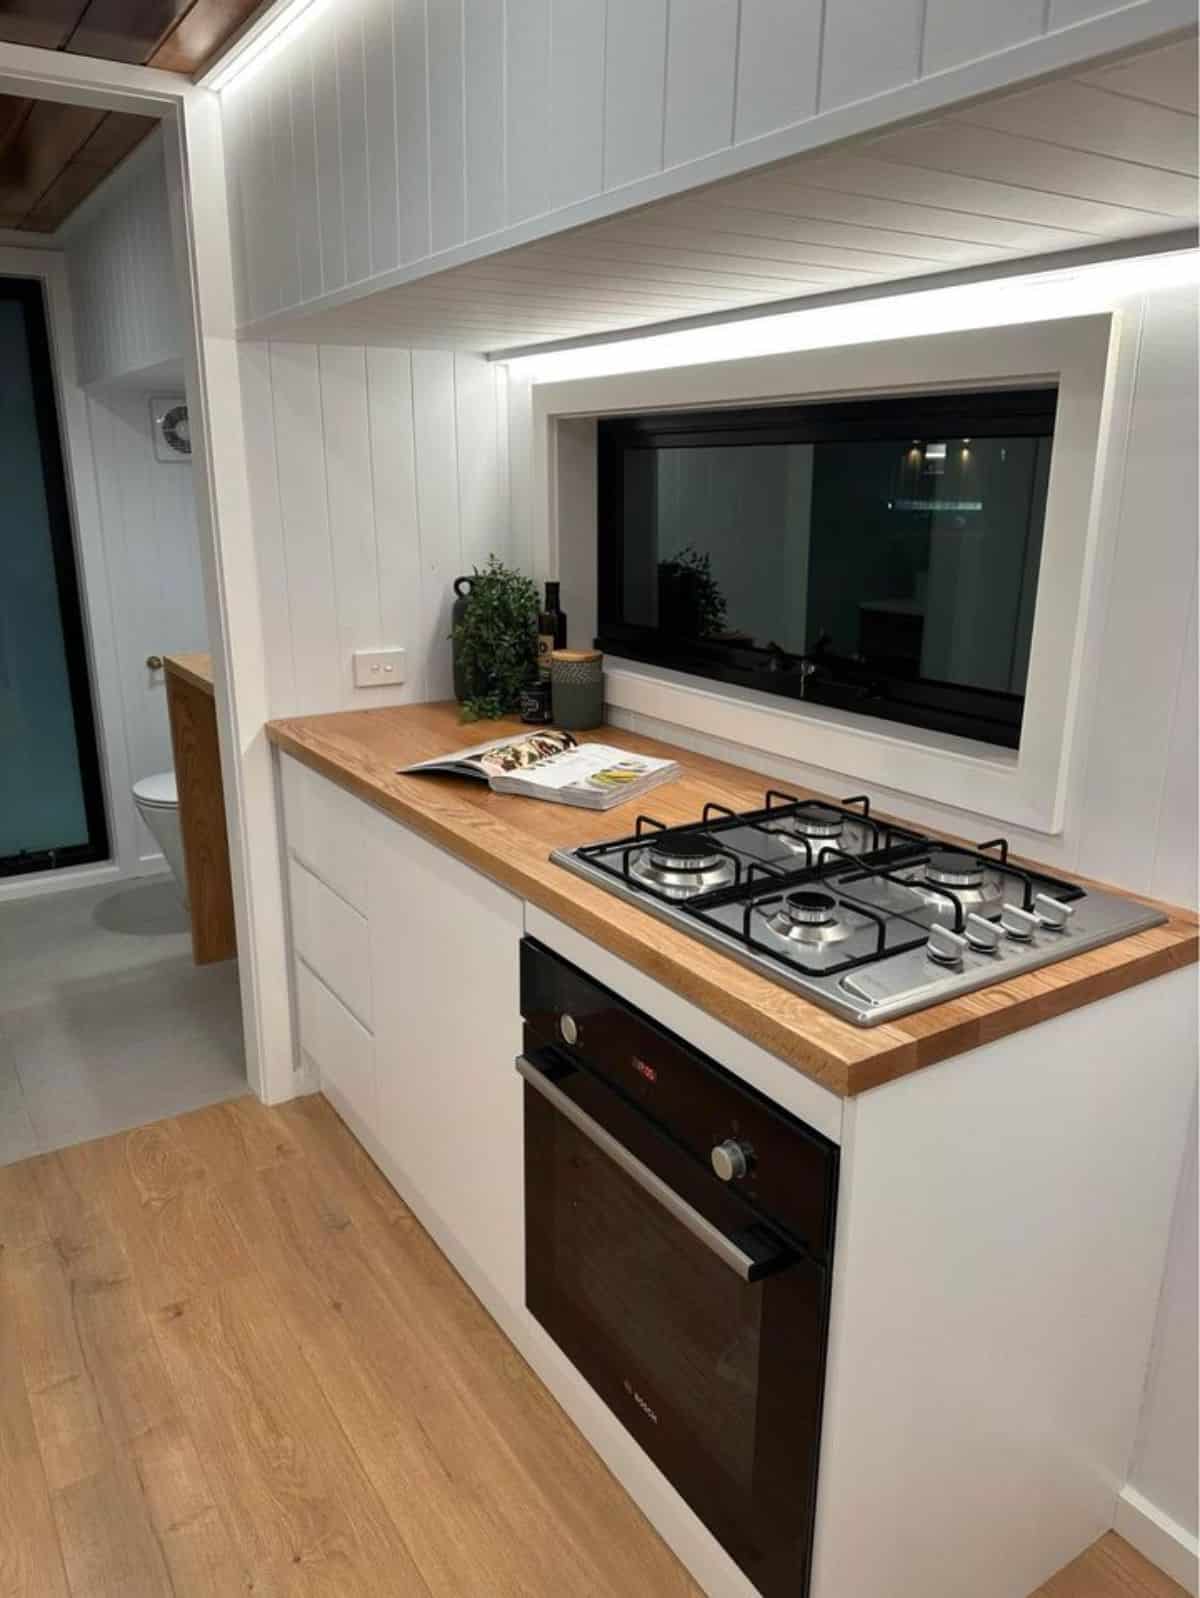 double galley kitchen setup with stove and oven